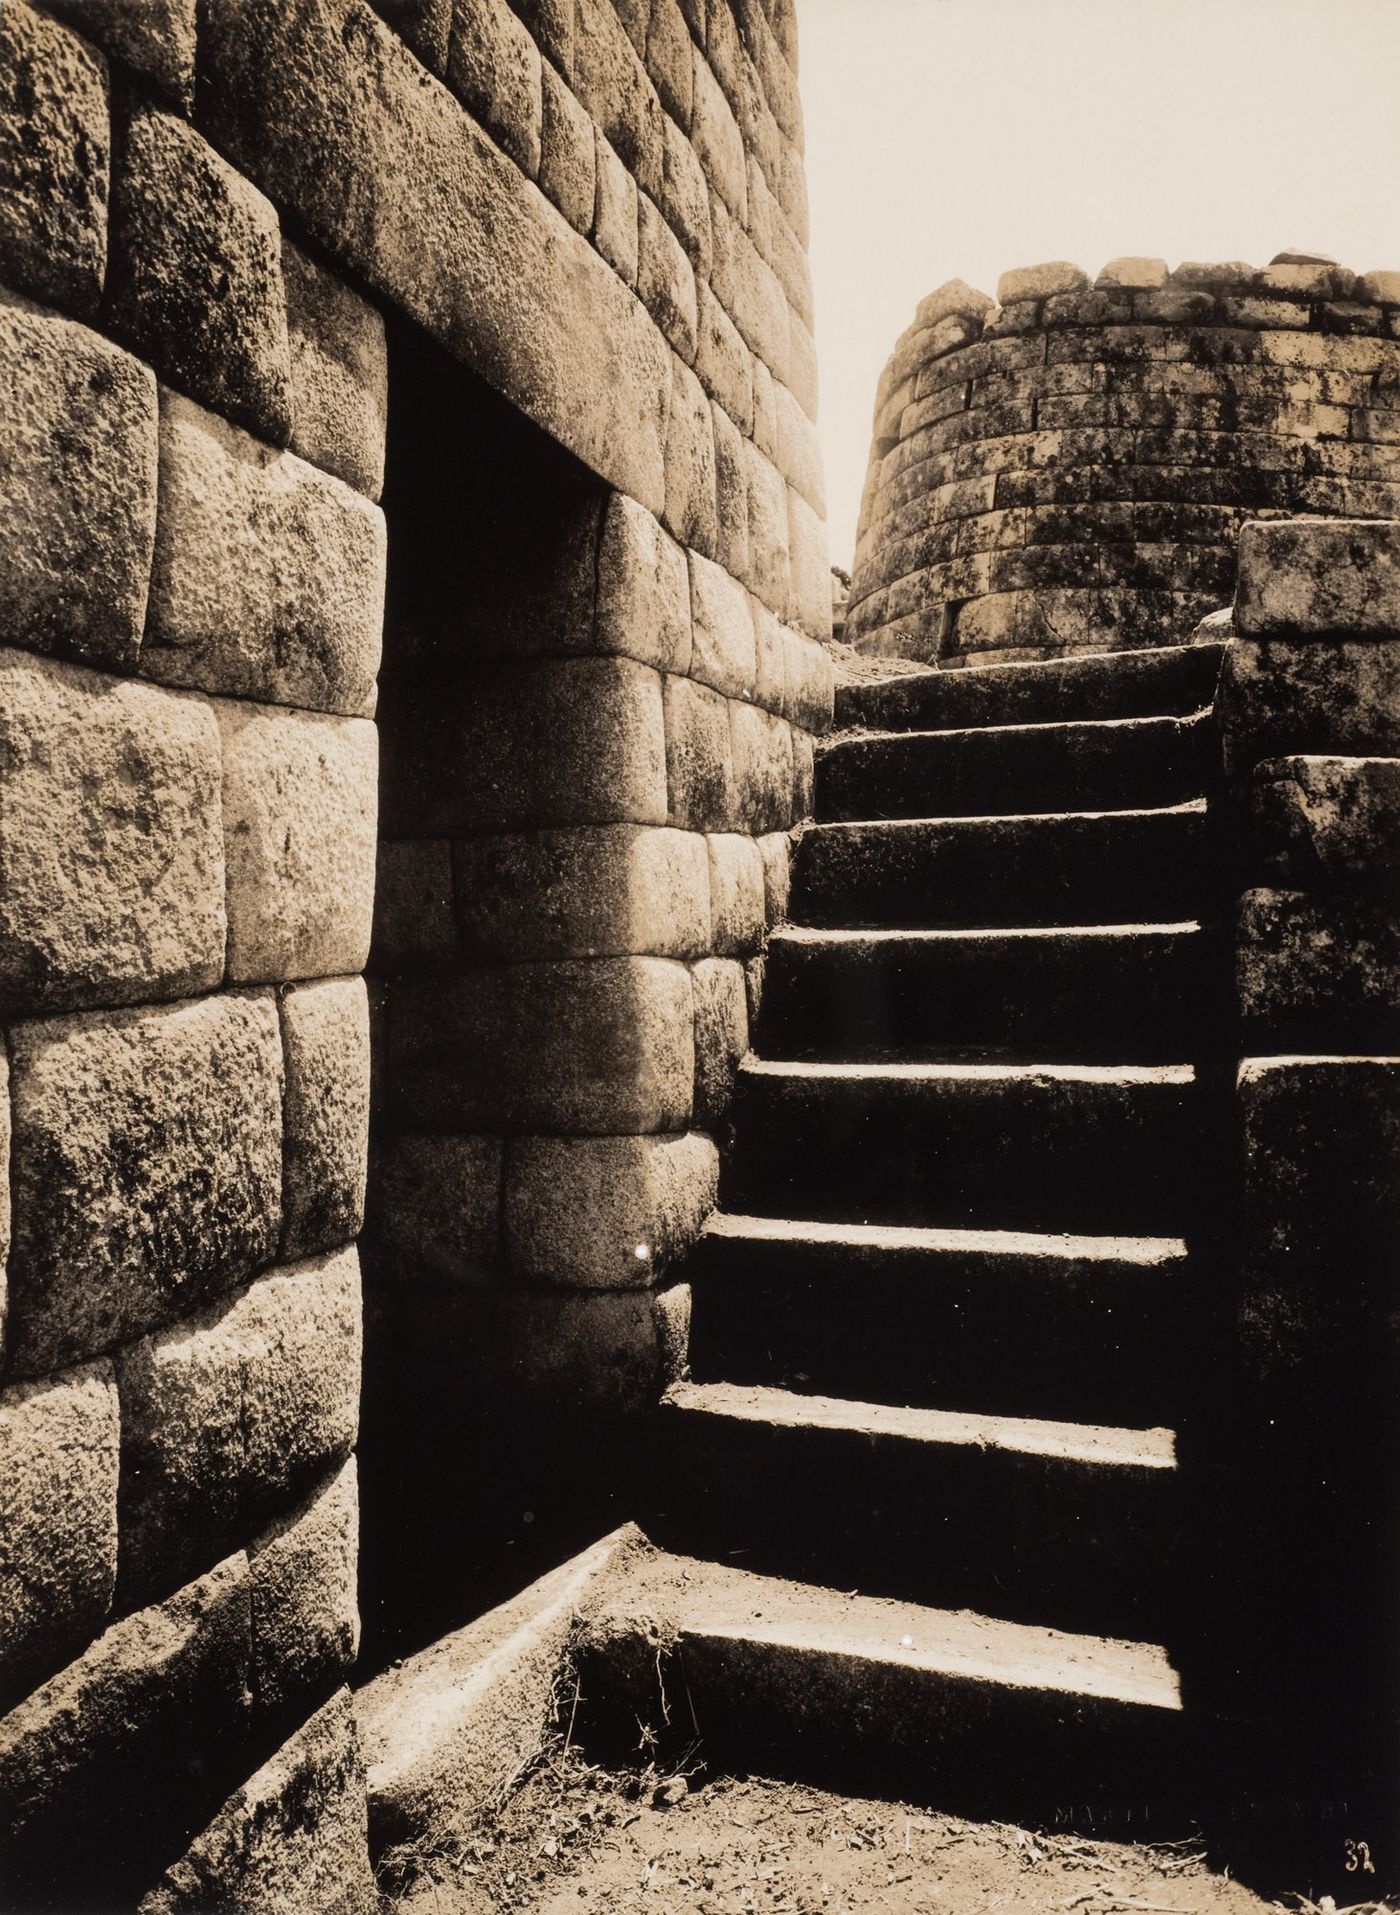 View of the entrance to the House of Ñusta and the staircase leading to the Torreón, Machu Picchu, Peru